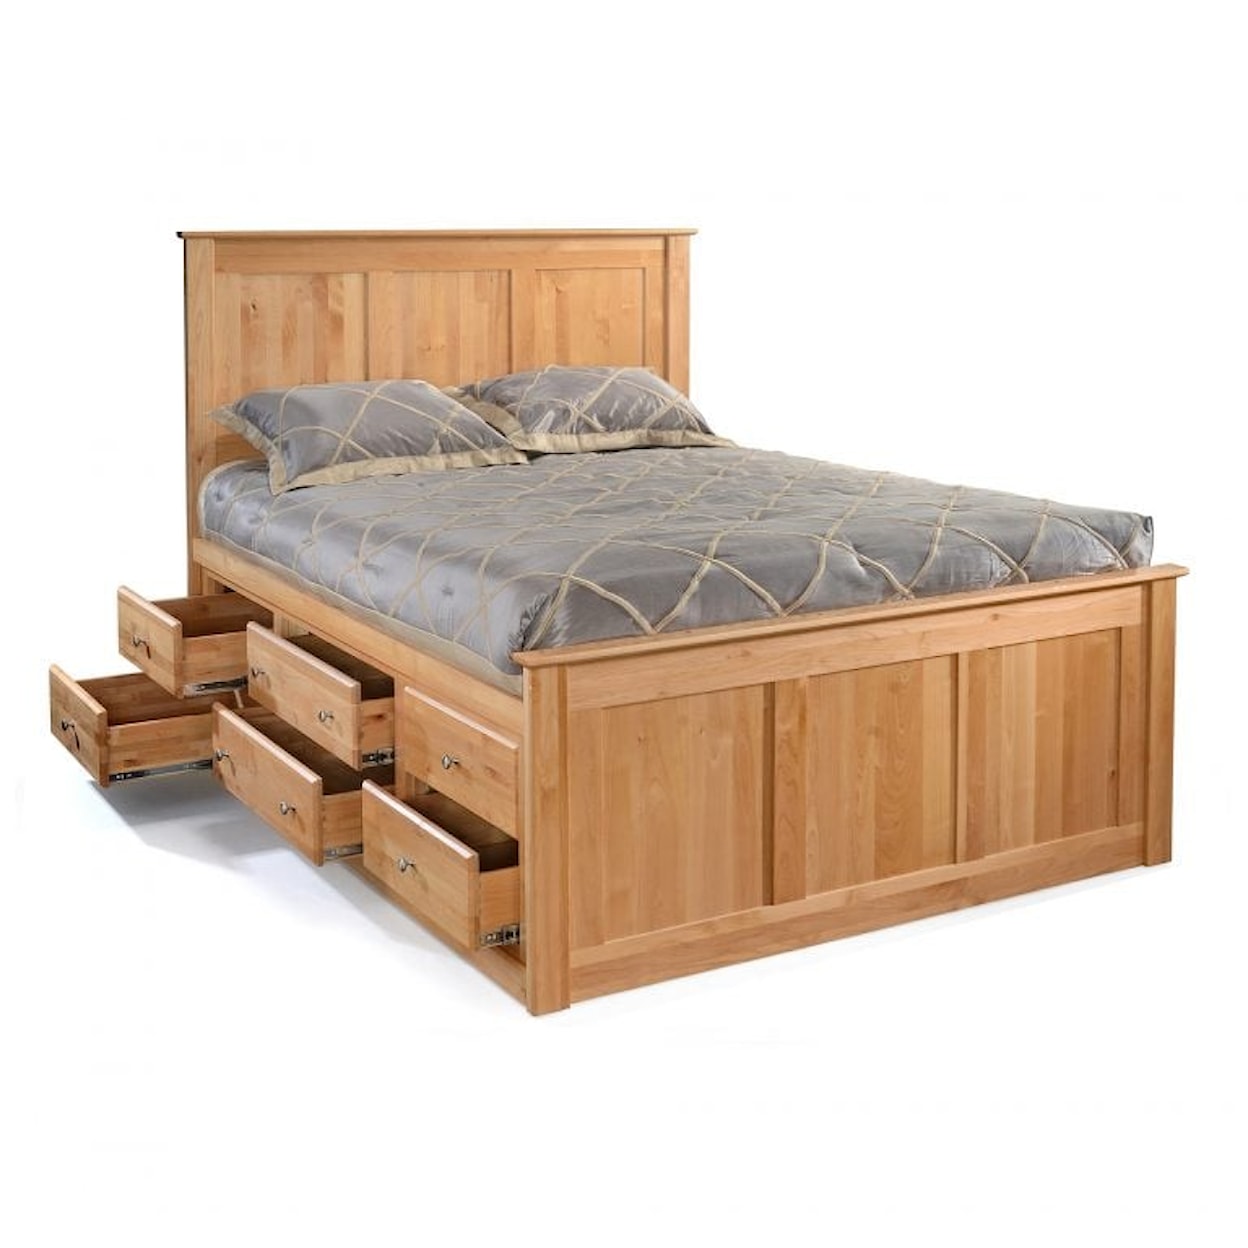 Archbold Furniture Chest Bed Twin 12-Drawer Chest Bed